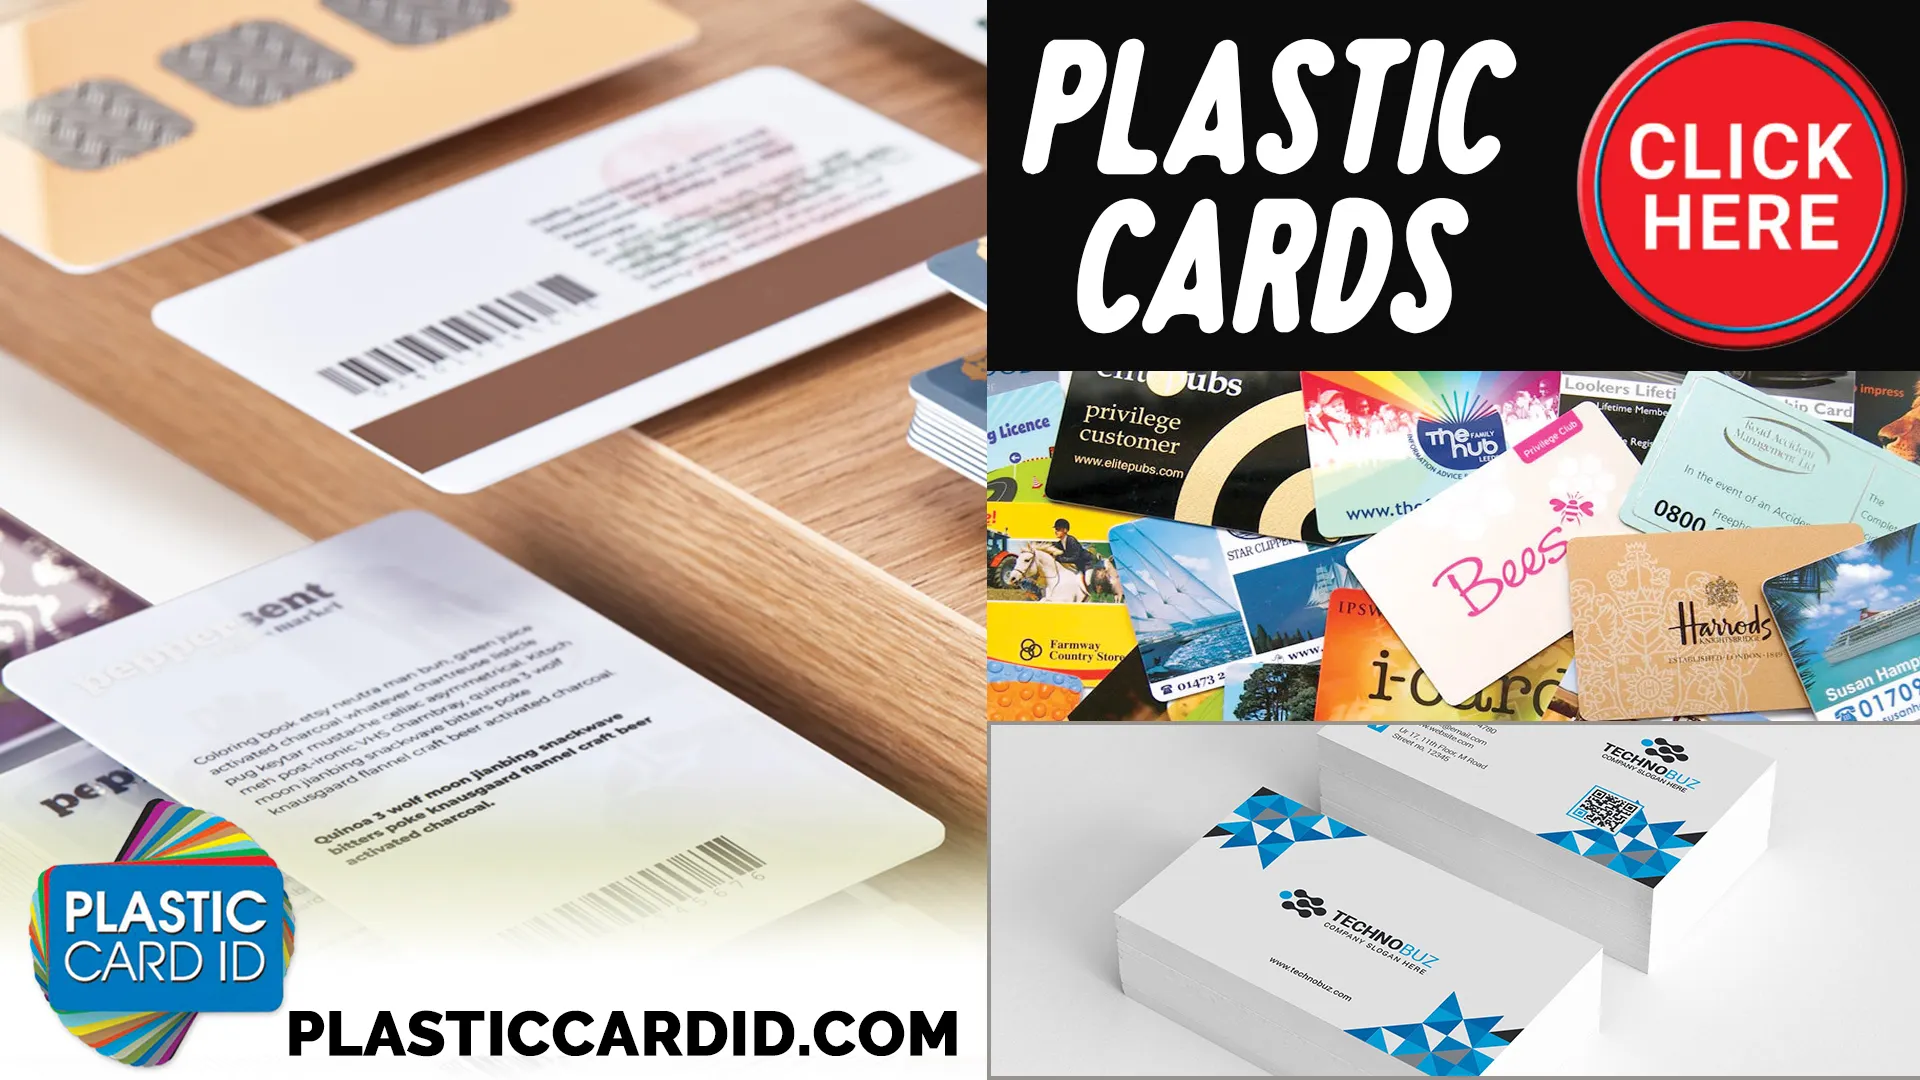 User-Friendly Options and Accessibility at Plastic Card ID




